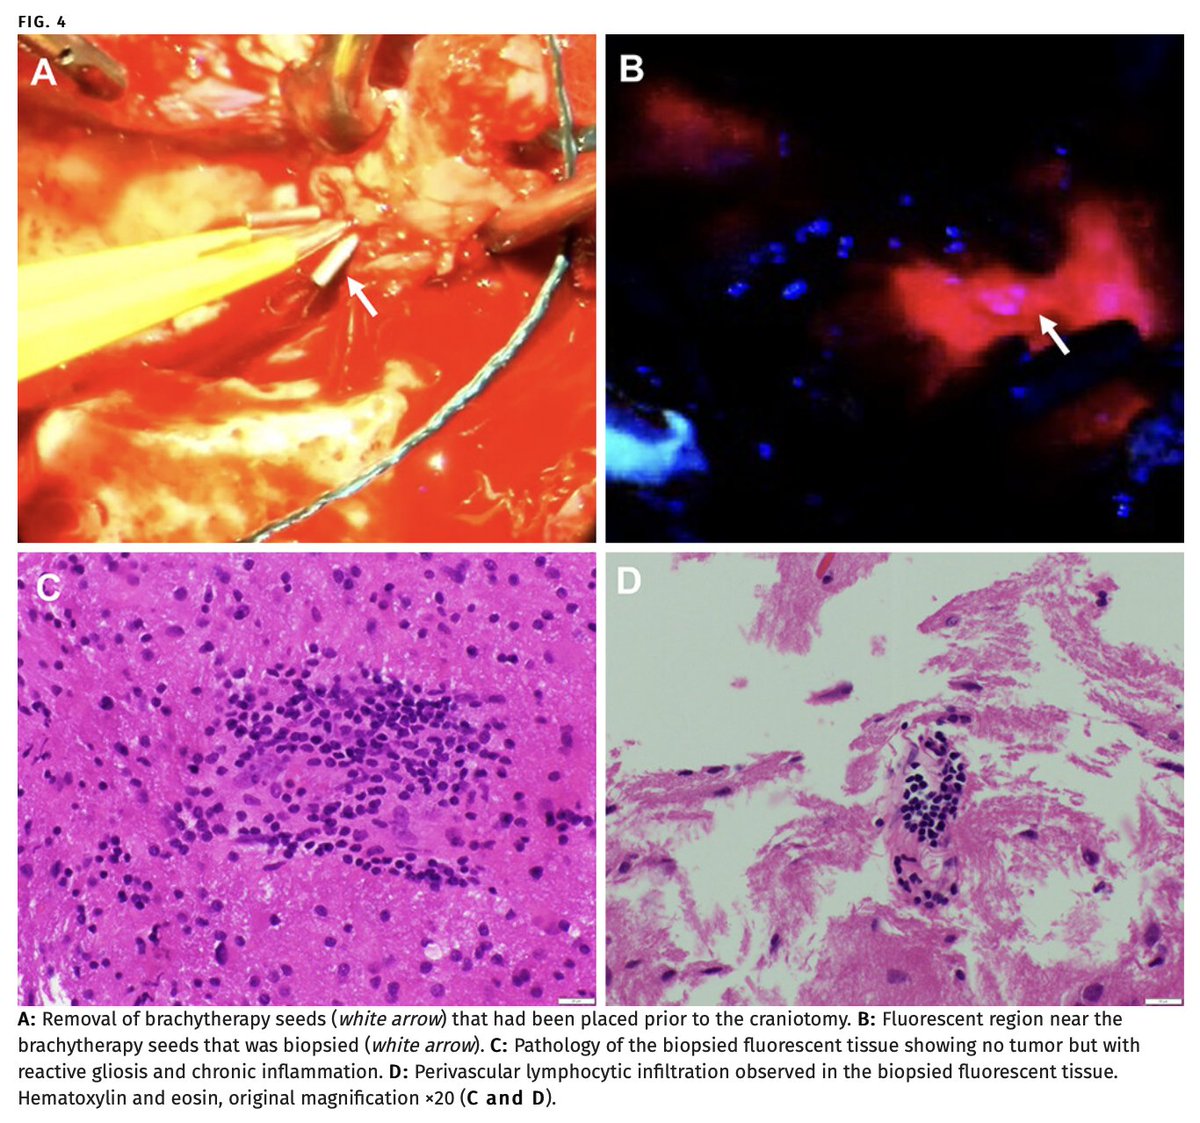 Excited to share our case report in @TheJNS on 5-ALA fluorescence in nonneoplastic tissue following brachytherapy, which was found during the resection of recurrent anaplastic meningioma and associated with immune cell infiltration.